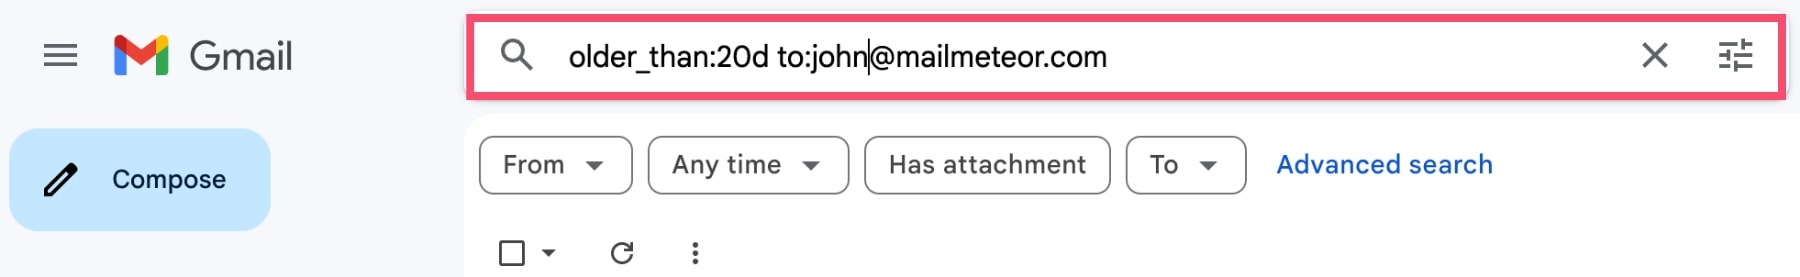 Search Gmail by dates and recipient